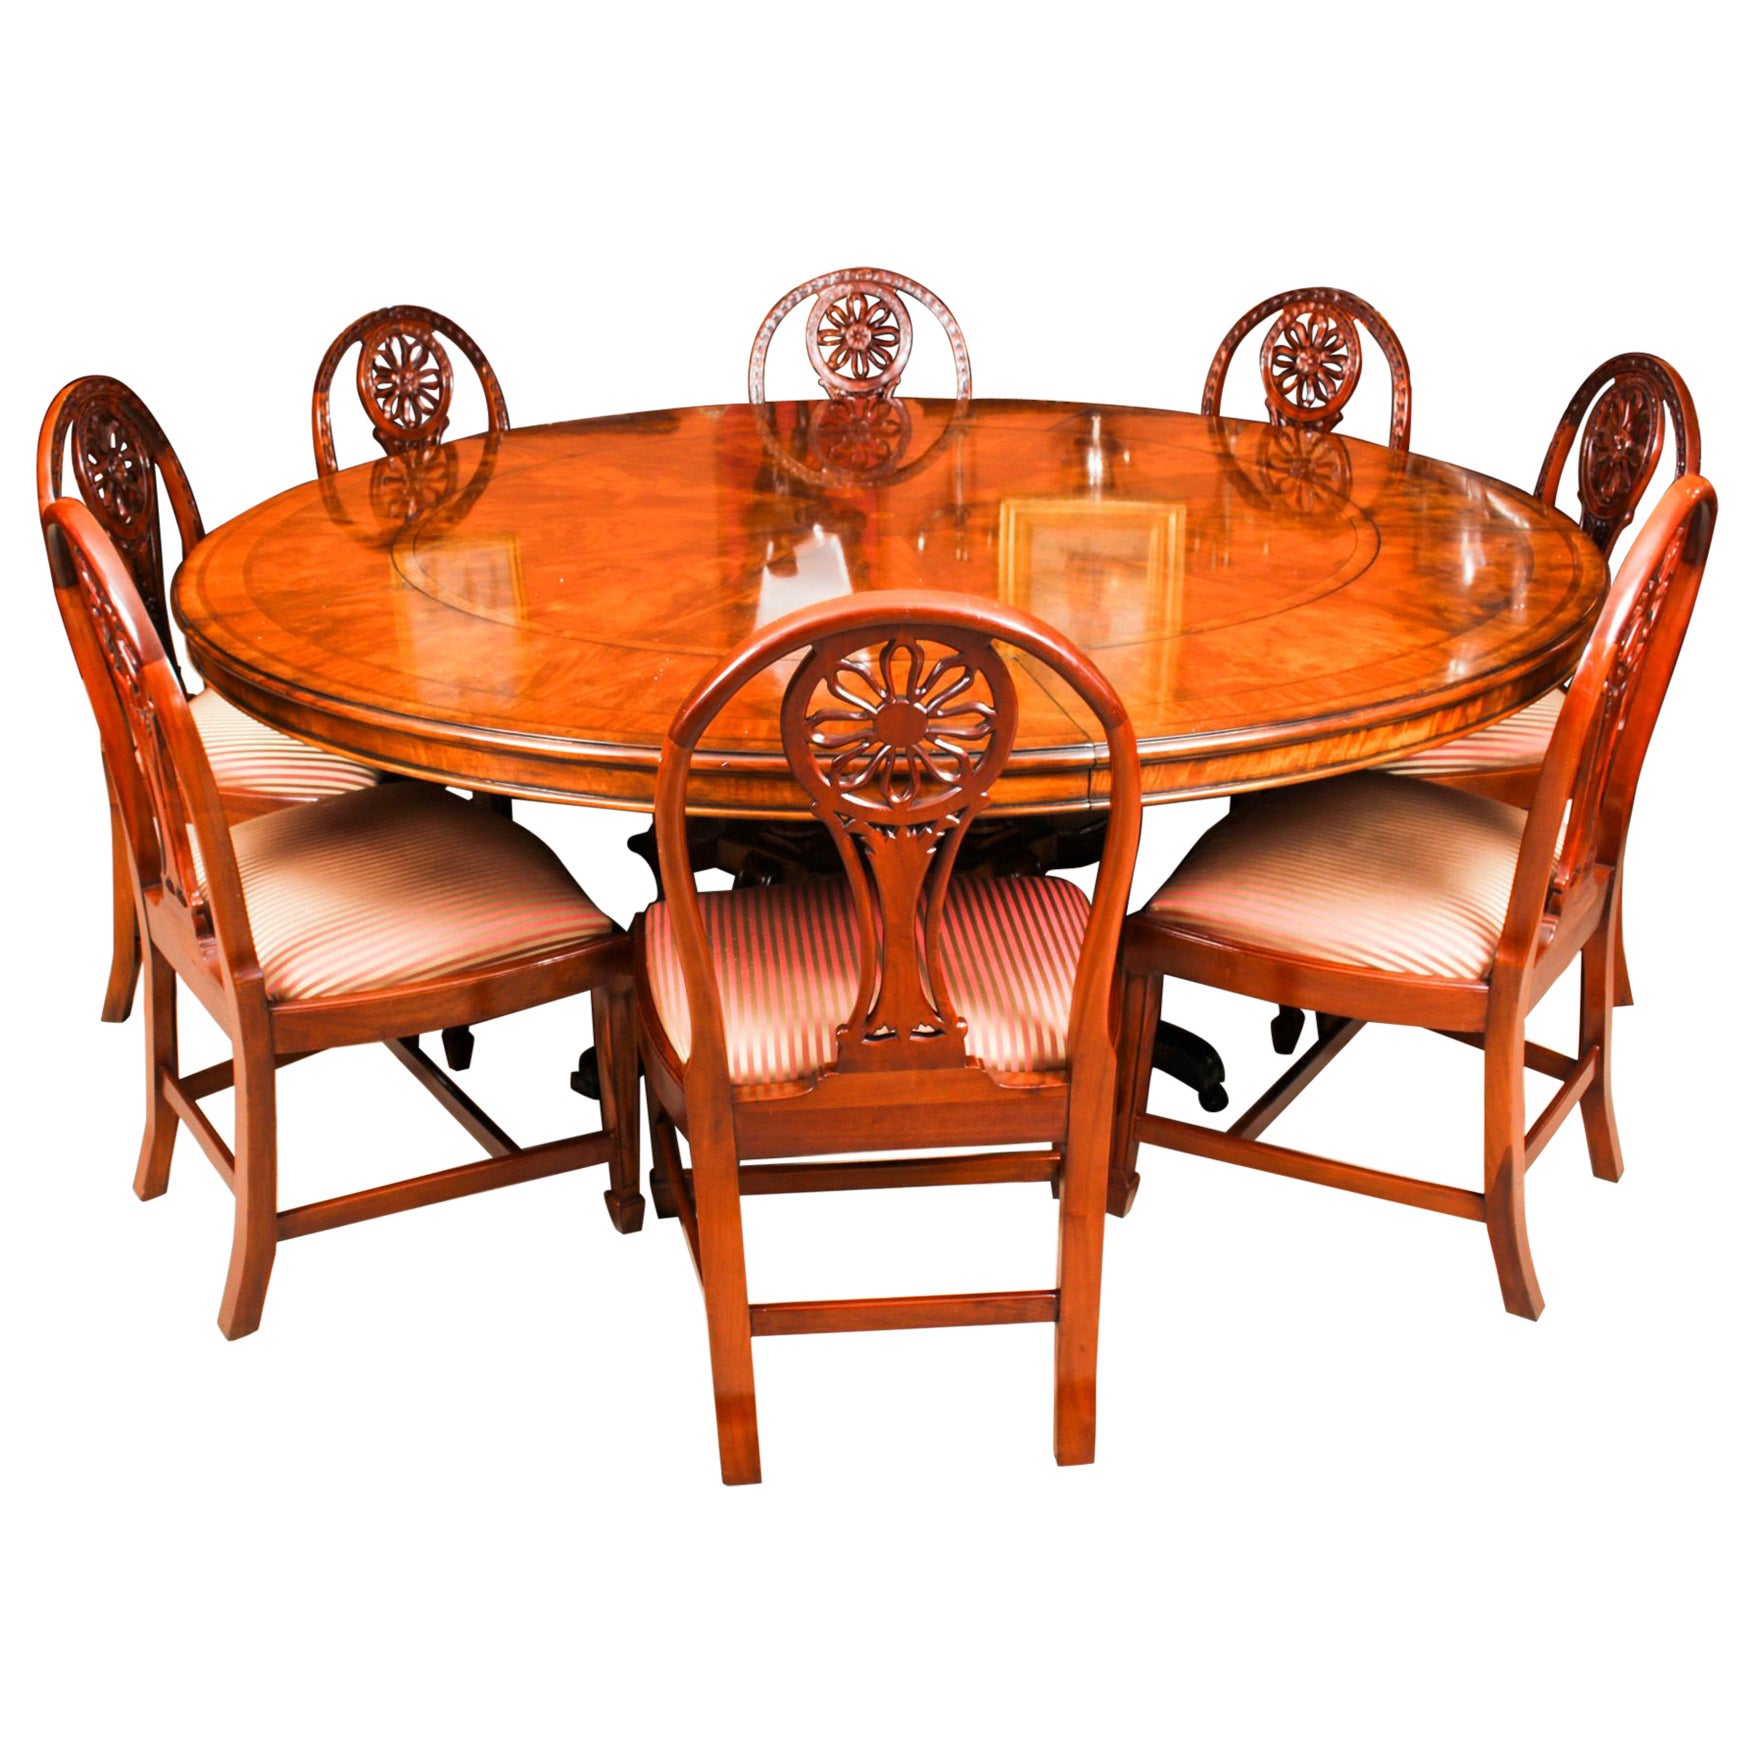 Vintage Diameter Flame Mahogany Jupe Dining Table & 8 Chairs 20th C